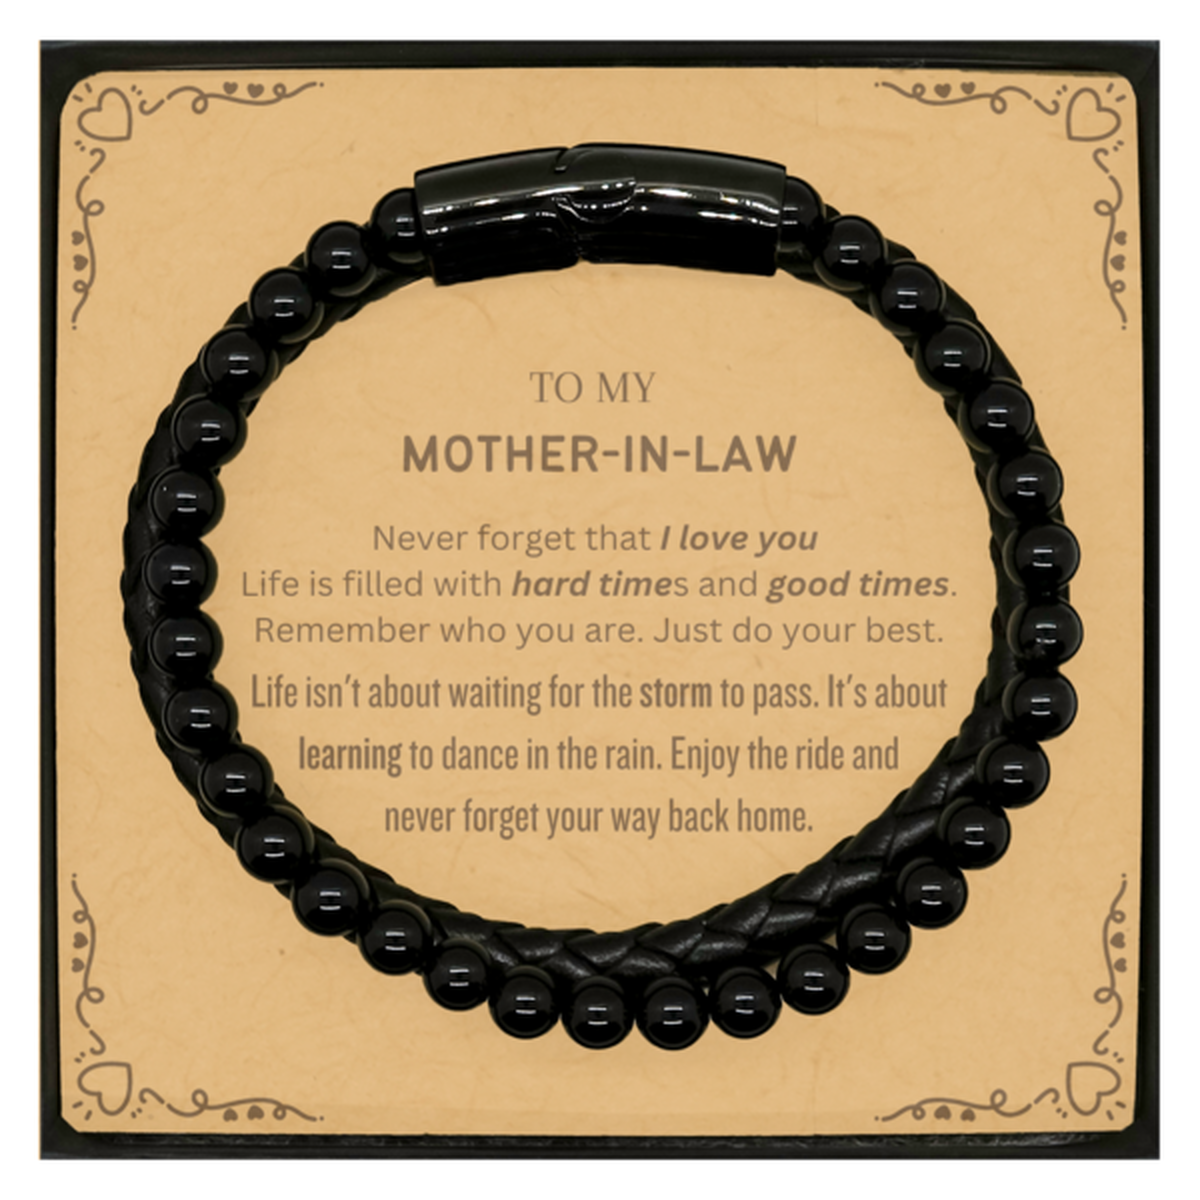 Christmas Mother-In-Law Stone Leather Bracelets Gifts, To My Mother-In-Law Birthday Thank You Gifts For Mother-In-Law, Graduation Unique Gifts For Mother-In-Law To My Mother-In-Law Never forget that I love you life is filled with hard times and good times